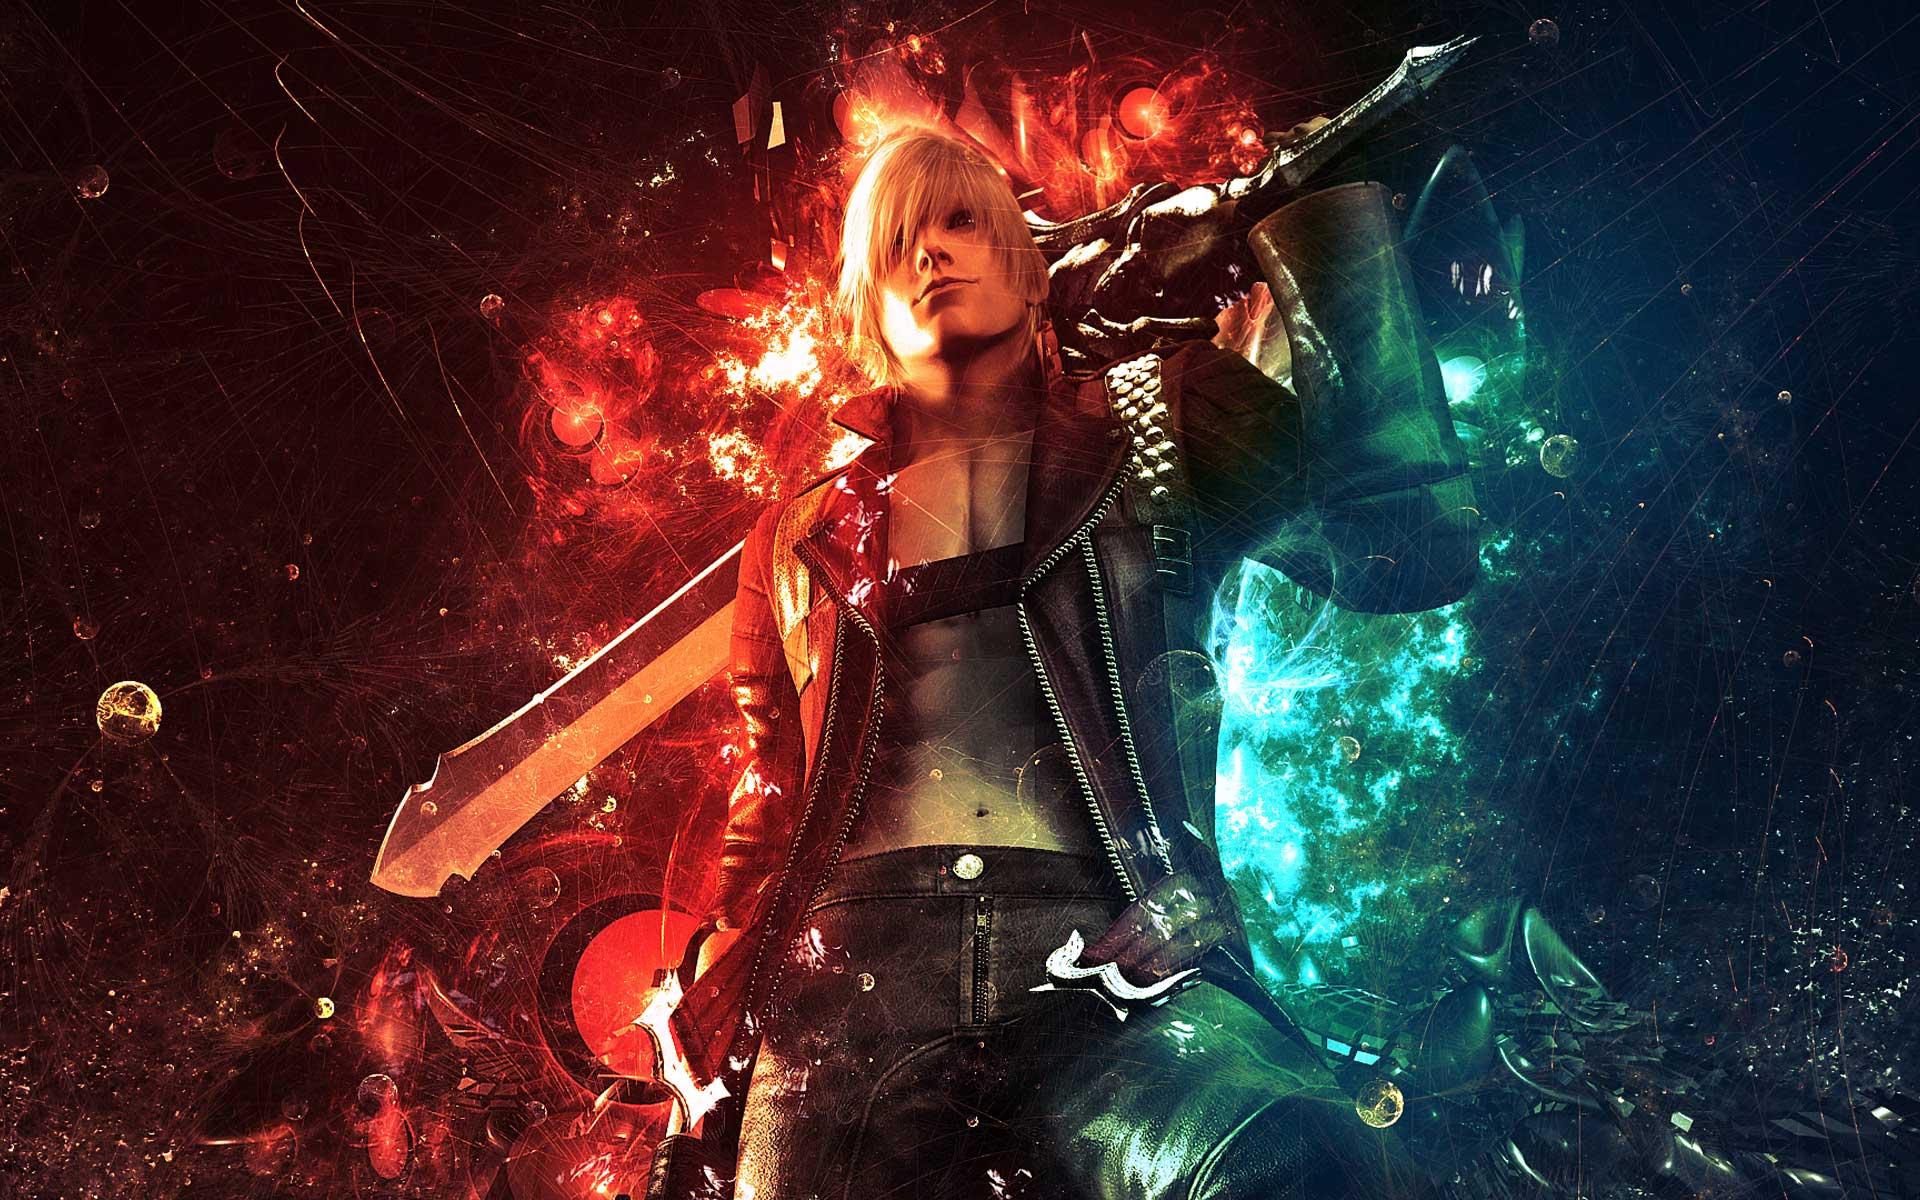 Devil May Cry 4 Dante Wallpaper Viewing Gallery HD Wallpapers Range